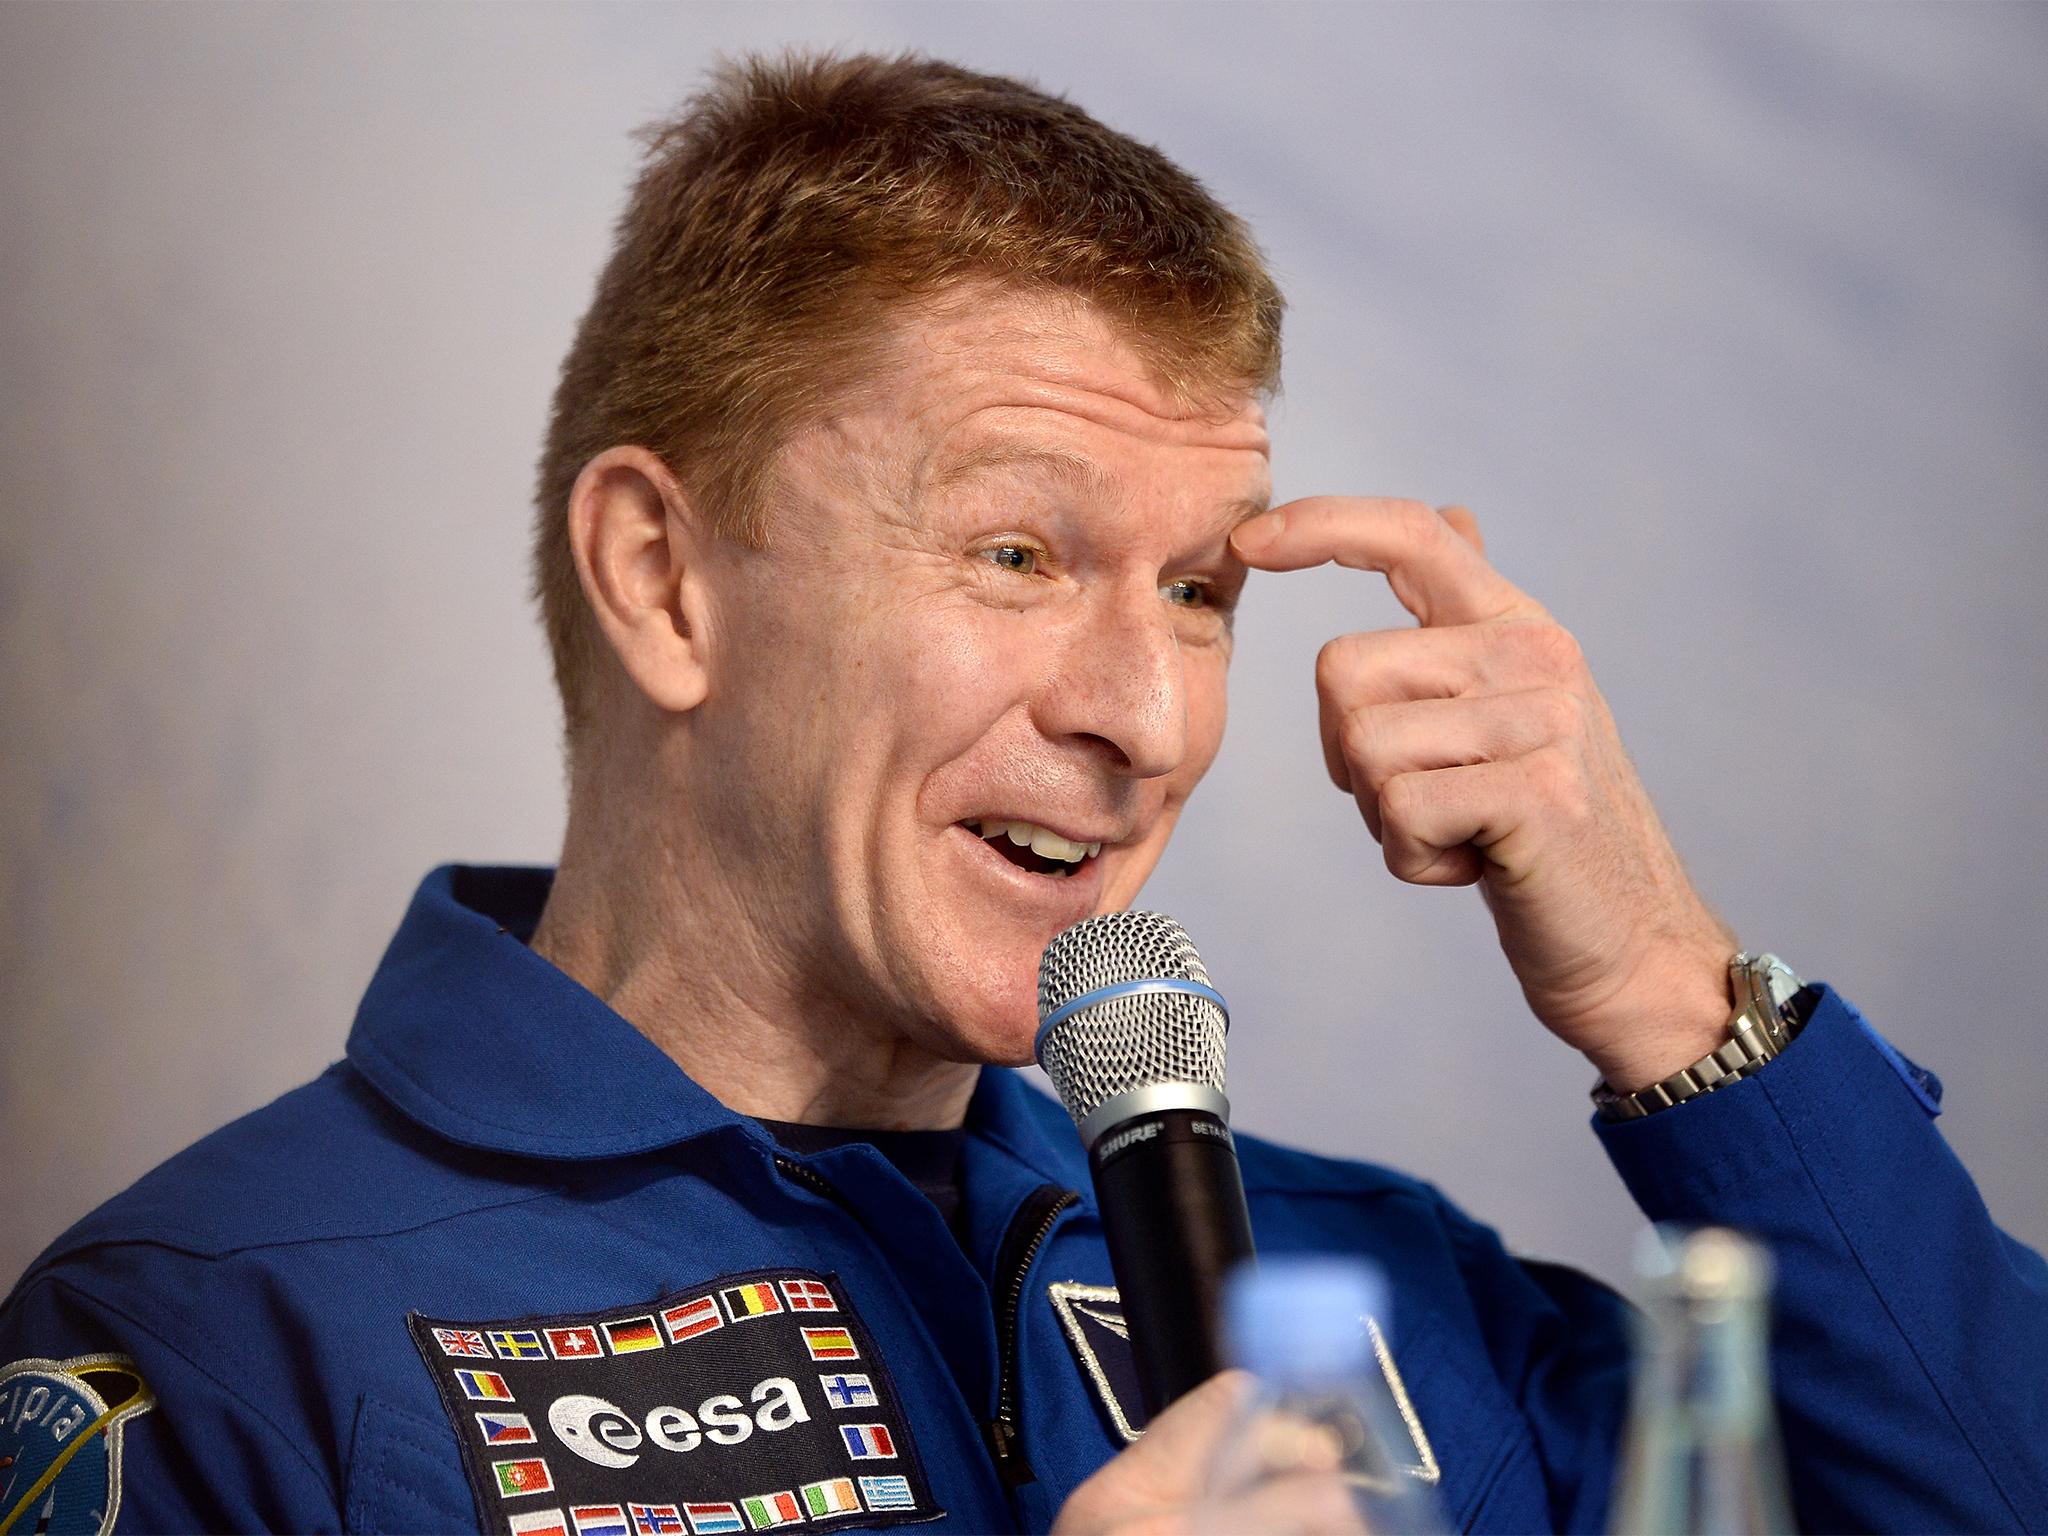 Tim Peake managed to run a marathon in space, while the rest of us struggled to get out of bed